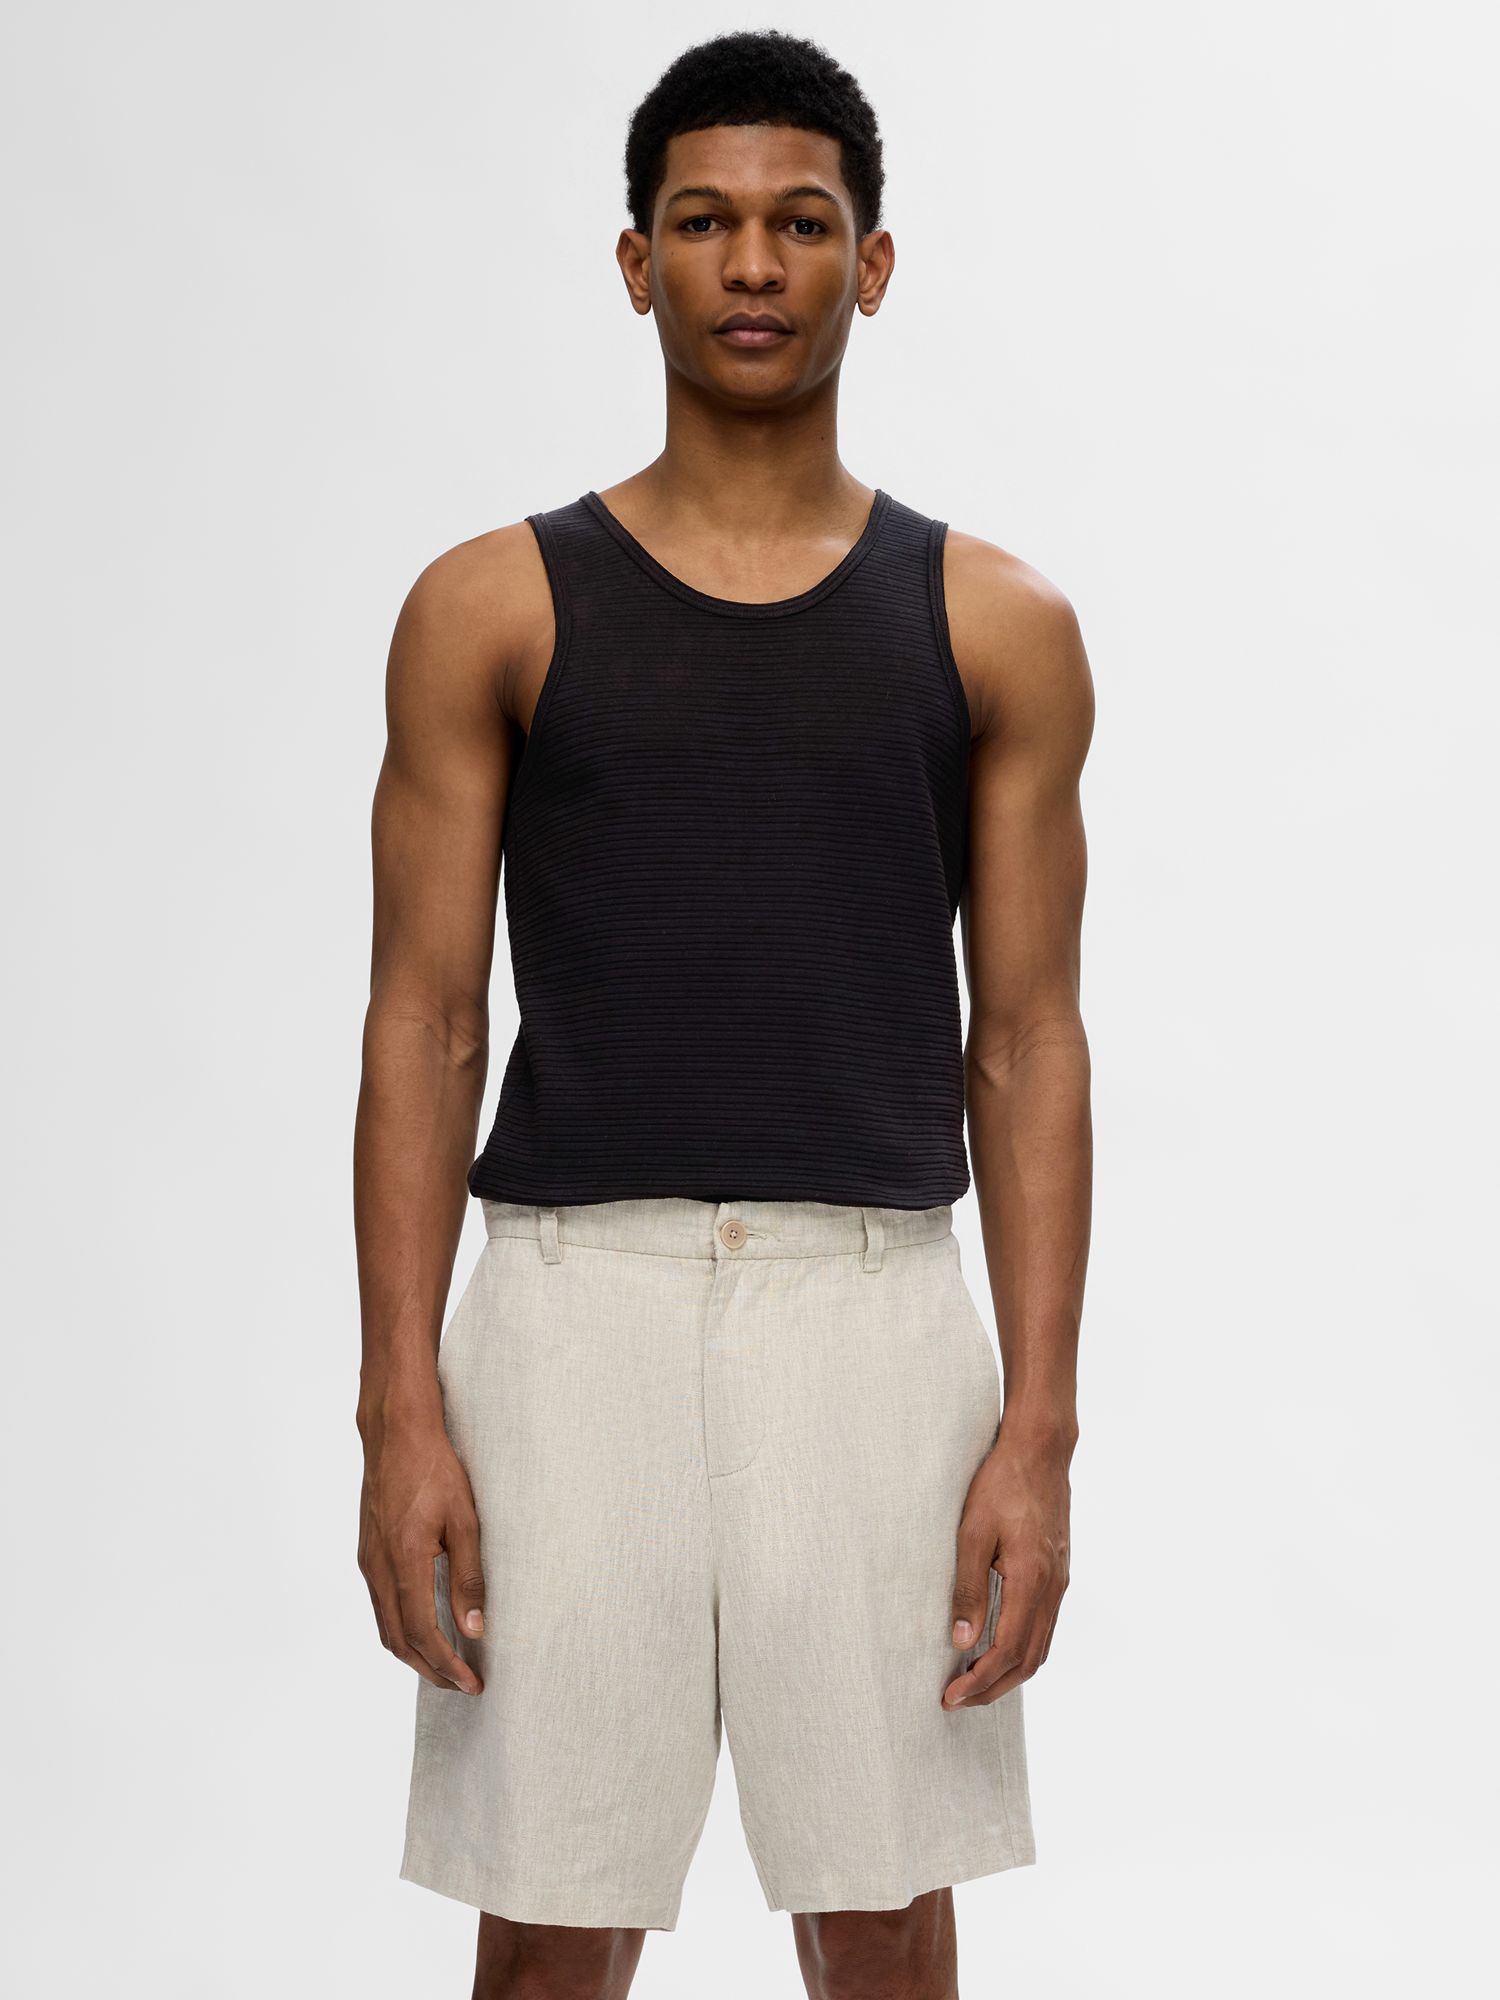 SELECTED HOMME Organic Cotton Tank Top, Black, S